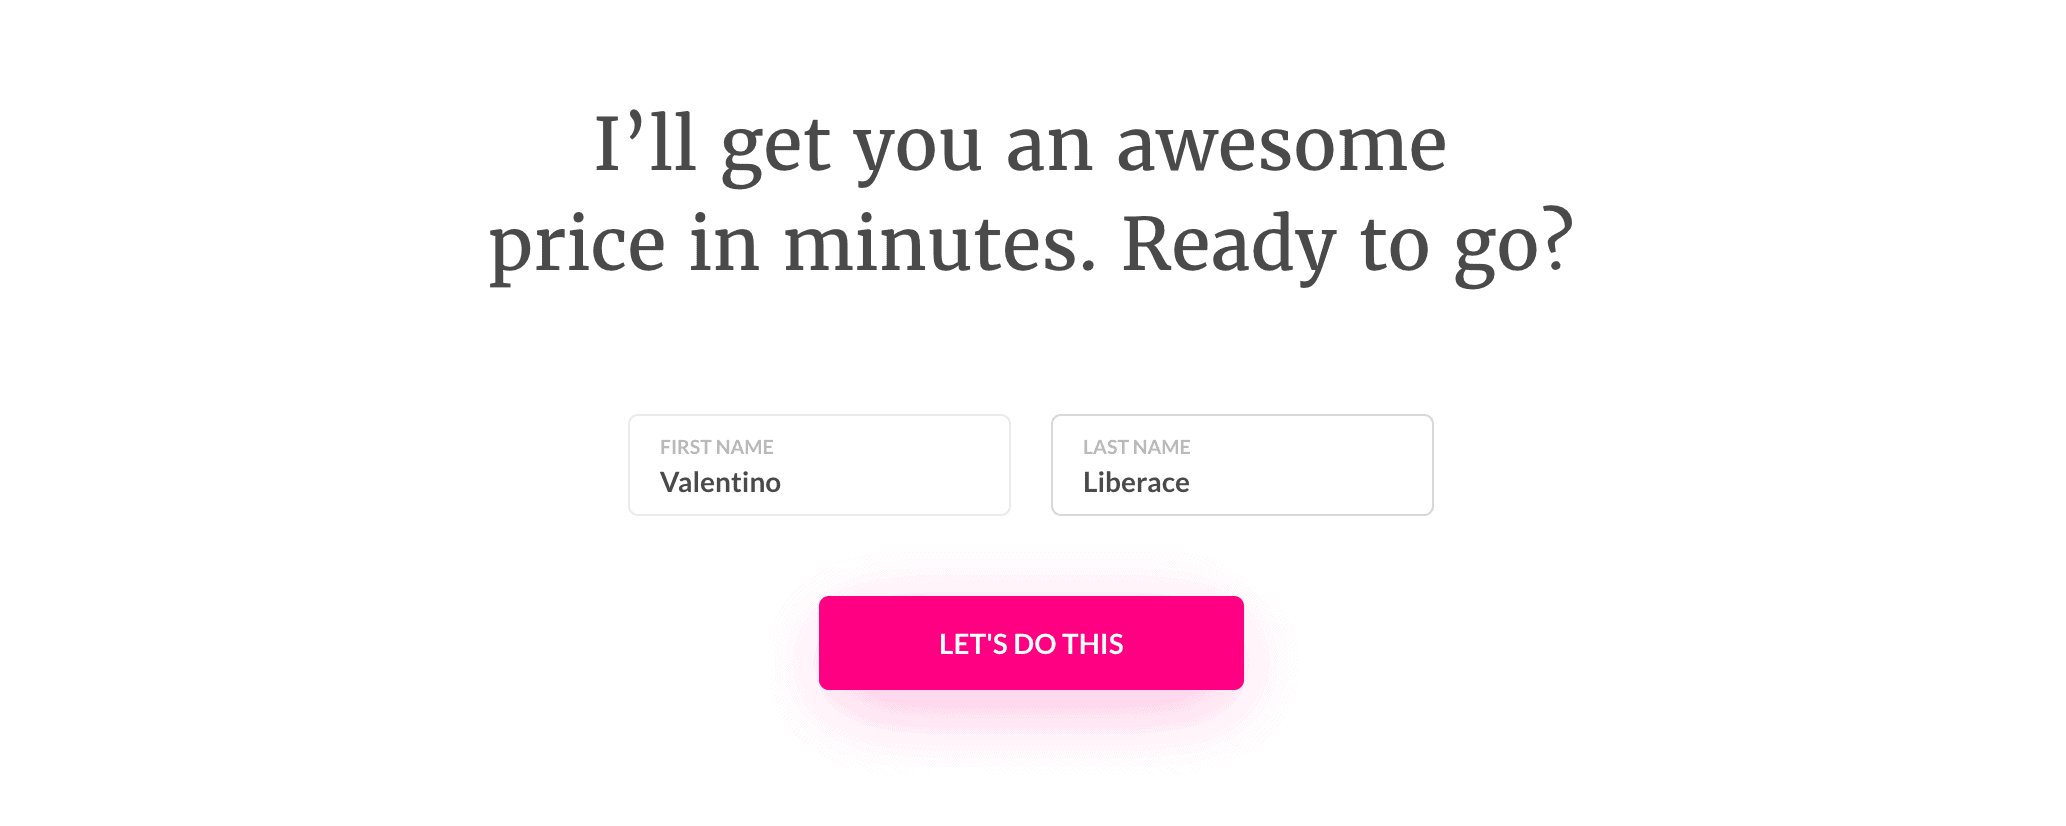 Lemonade’s quote builder is fun to use, and you can get a quote in minutes.